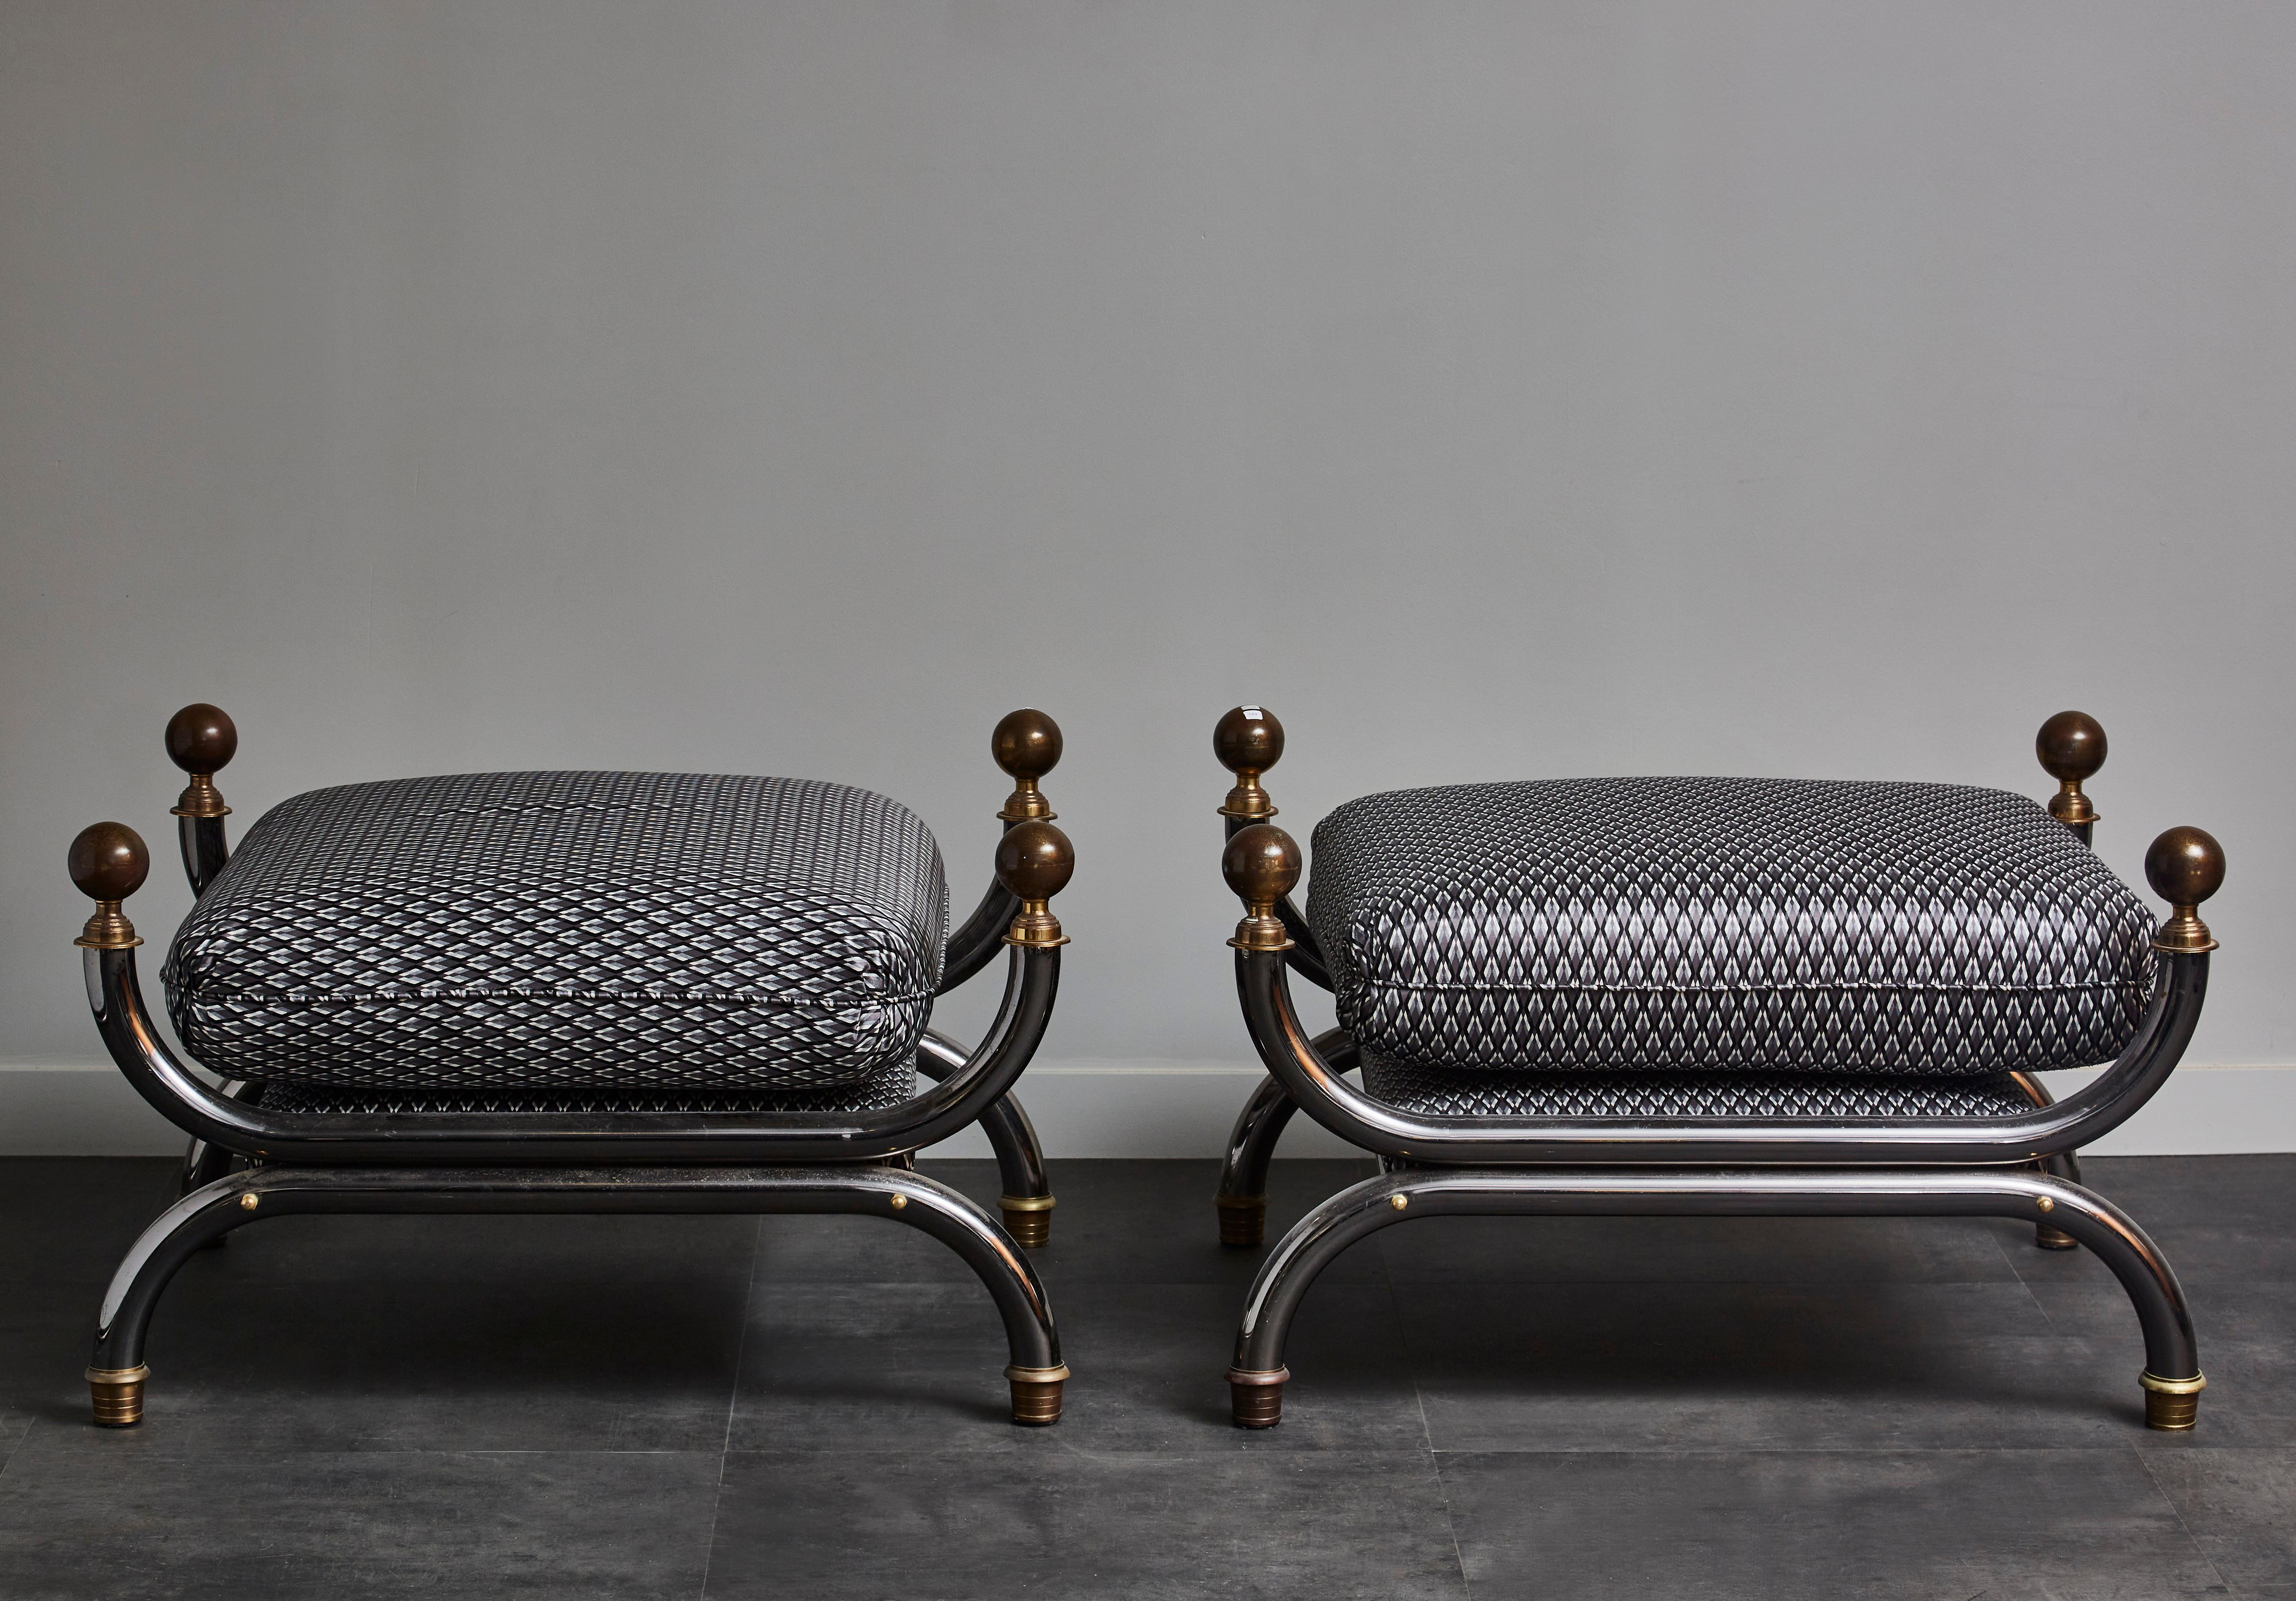 Pair of steel and patinated brass footstools, one cushion, fabric from Dedar Company.